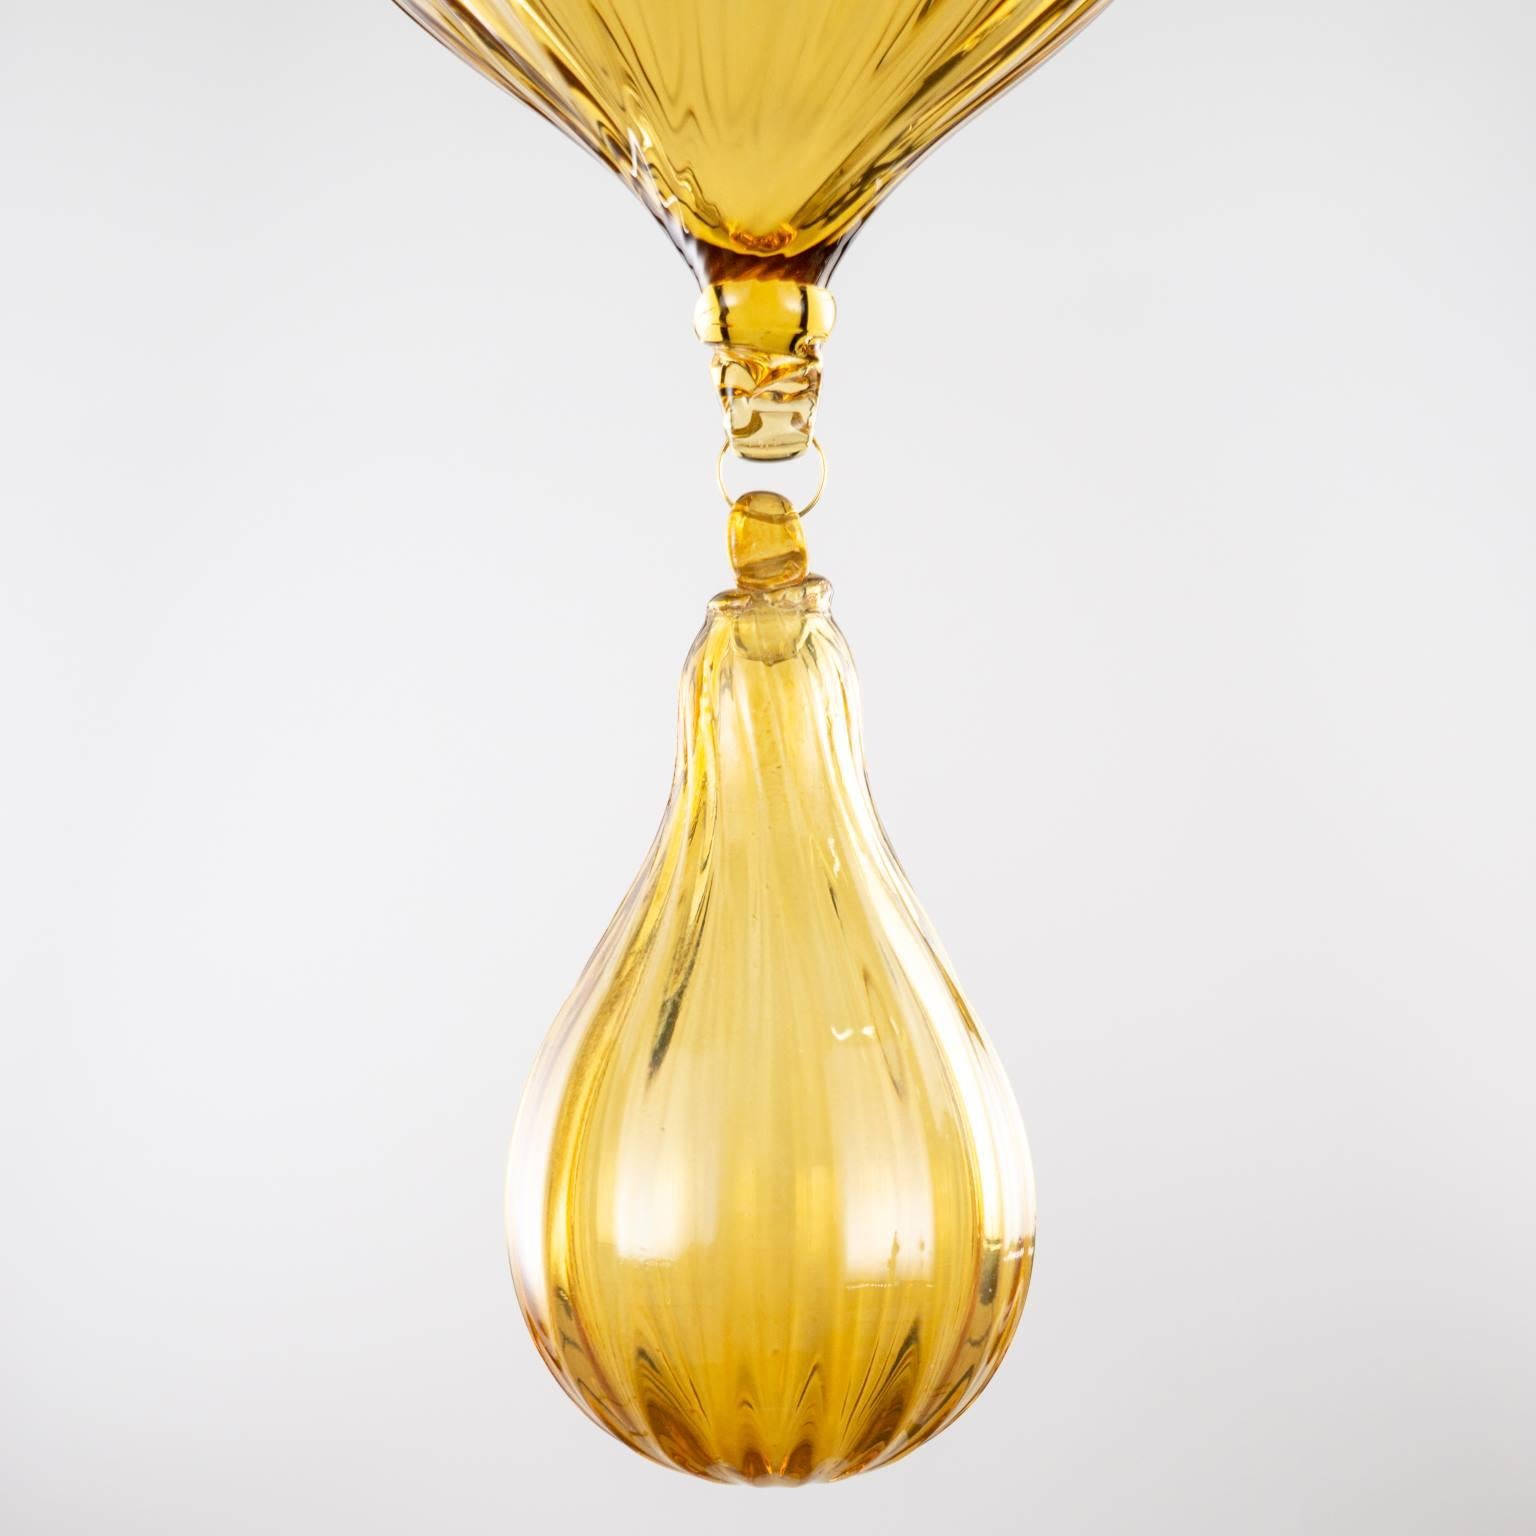 Suspension 1 Light Amber Murano Glass, Organza Amber Lampshade by Multiforme In New Condition For Sale In Trebaseleghe, IT